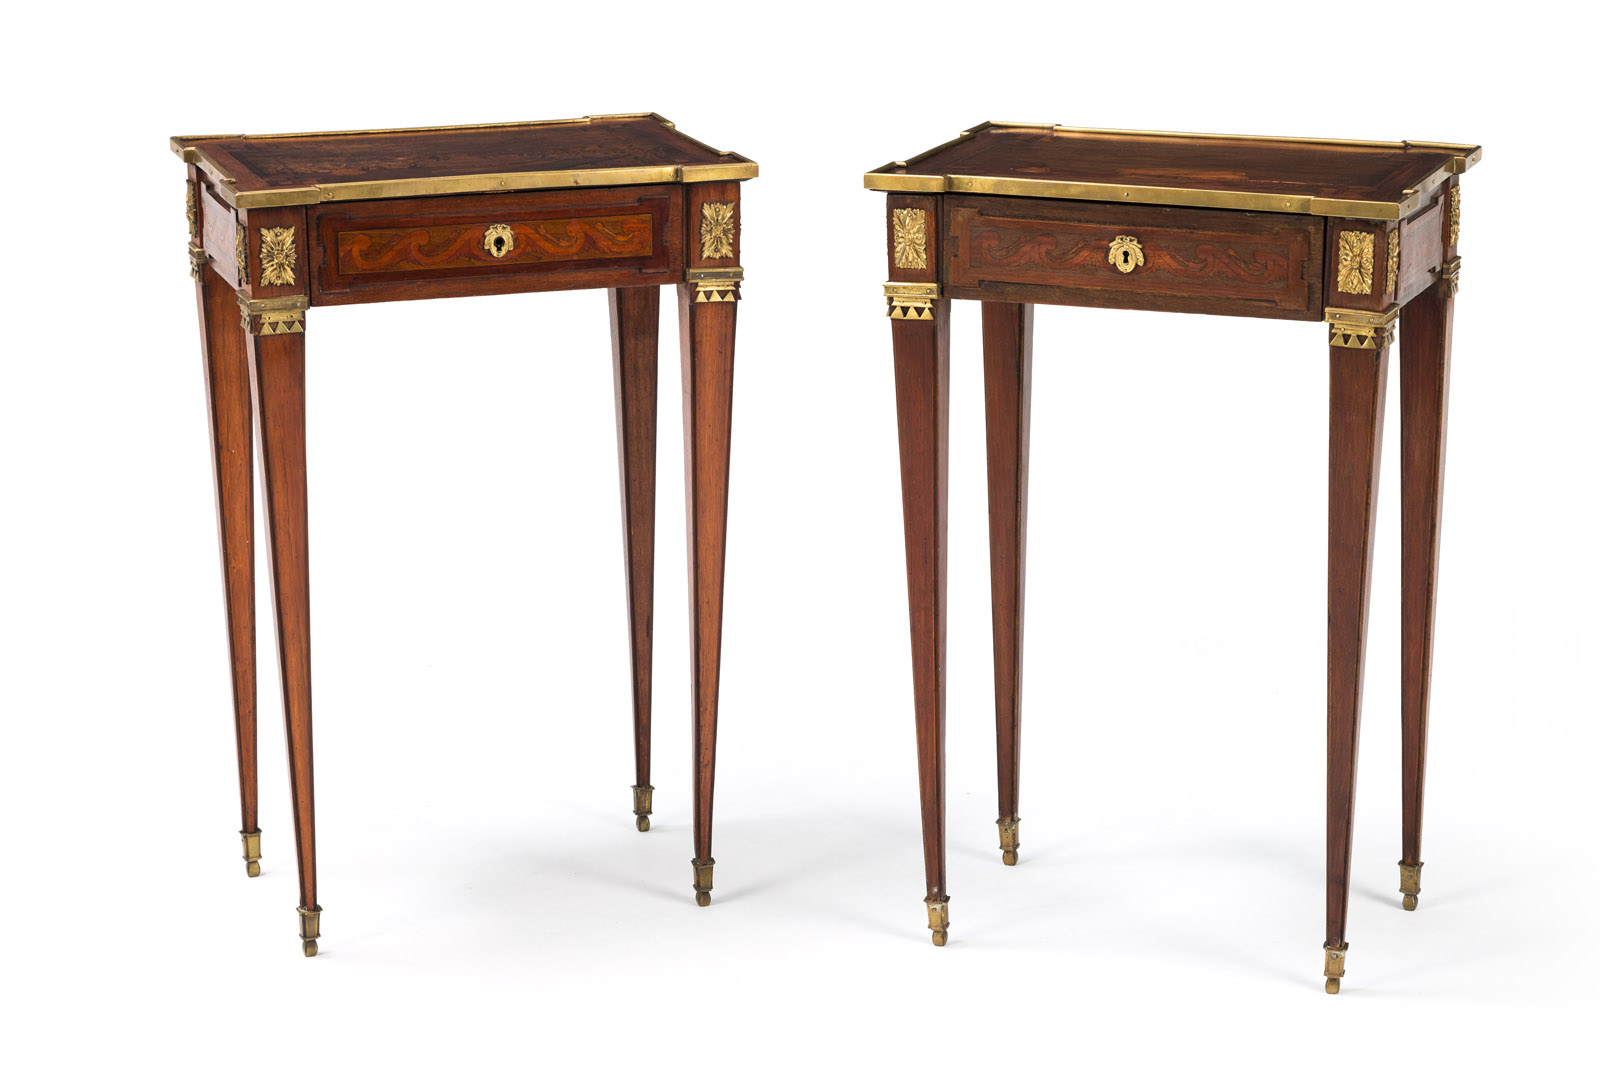 <b>A PAIR OF ORMOLU-MOUNTED WALNUT, AMARANTH, MAHOGANY AND FRUITWOOD MARQUETRY OCCASIONAL TABLES</b>